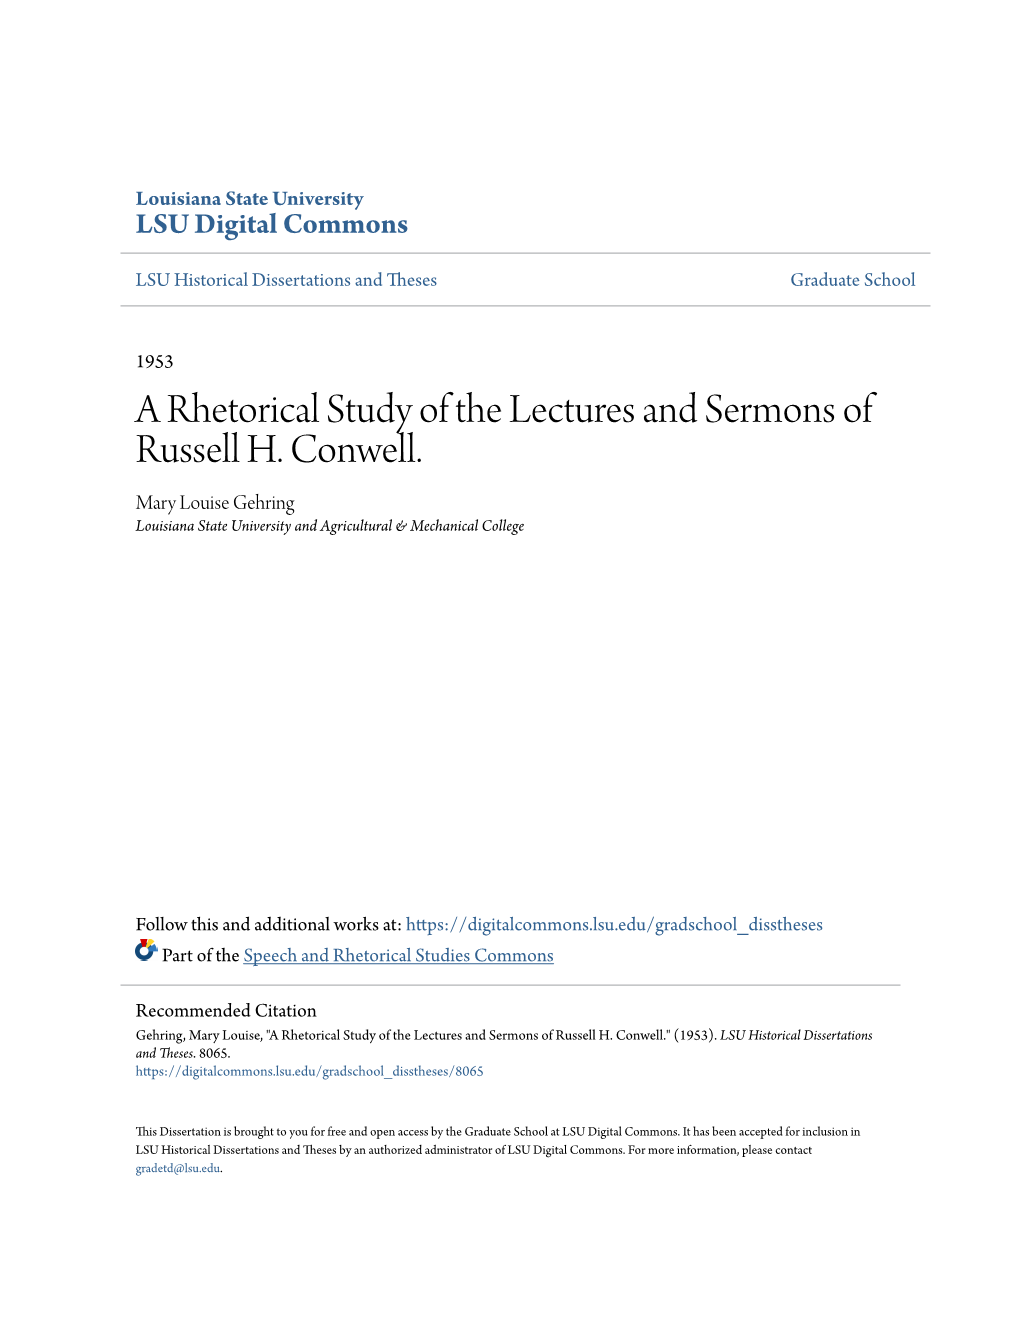 A Rhetorical Study of the Lectures and Sermons of Russell H. Conwell. Mary Louise Gehring Louisiana State University and Agricultural & Mechanical College